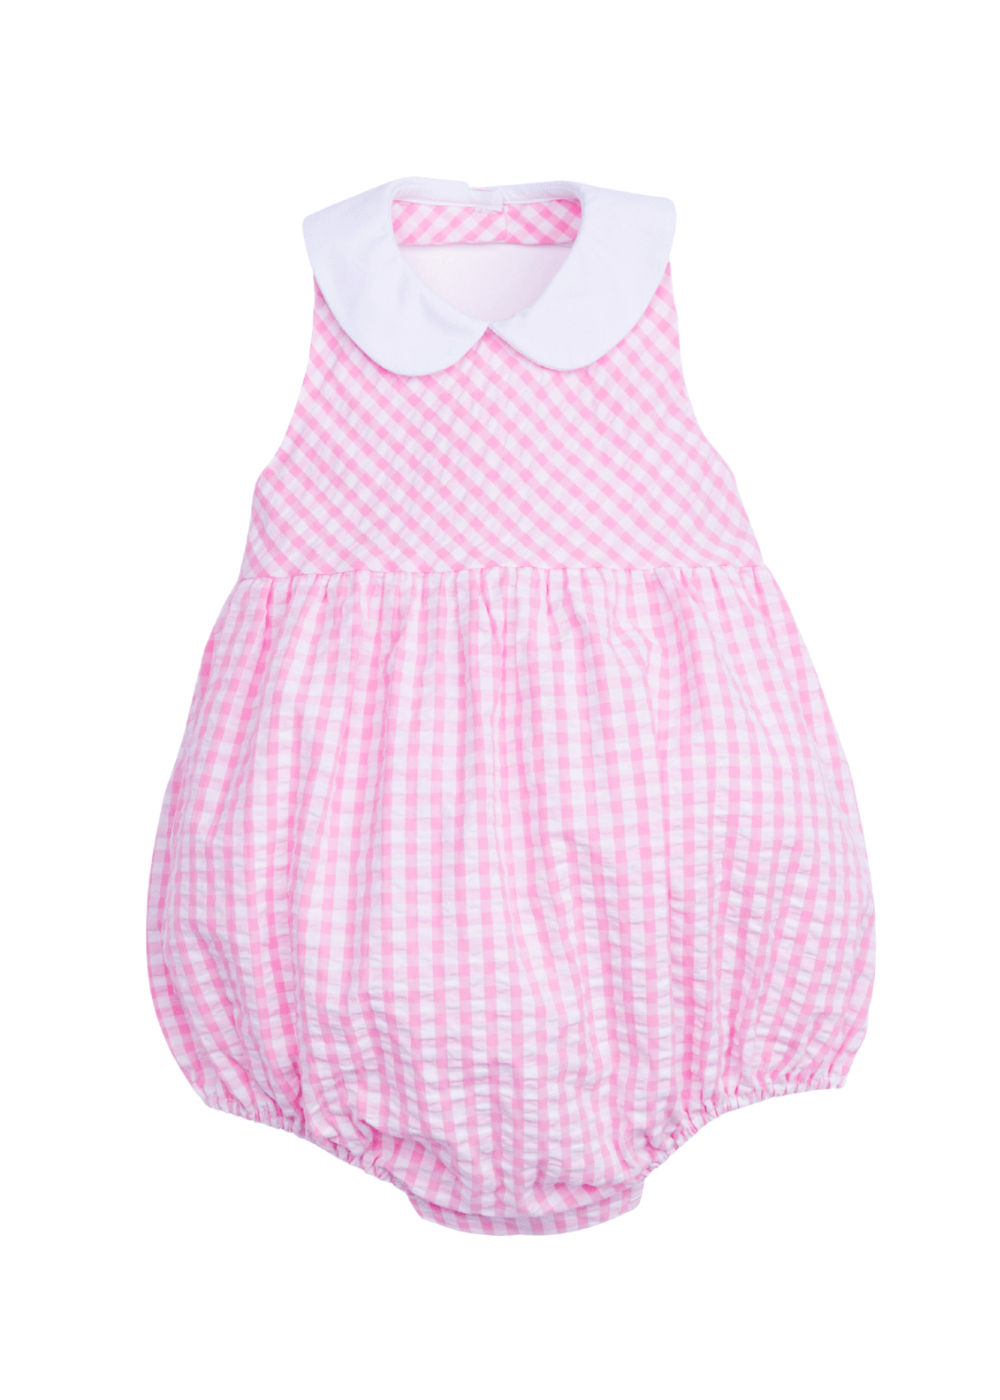 classic childrens clothing girls pink gingham bubble with white collar